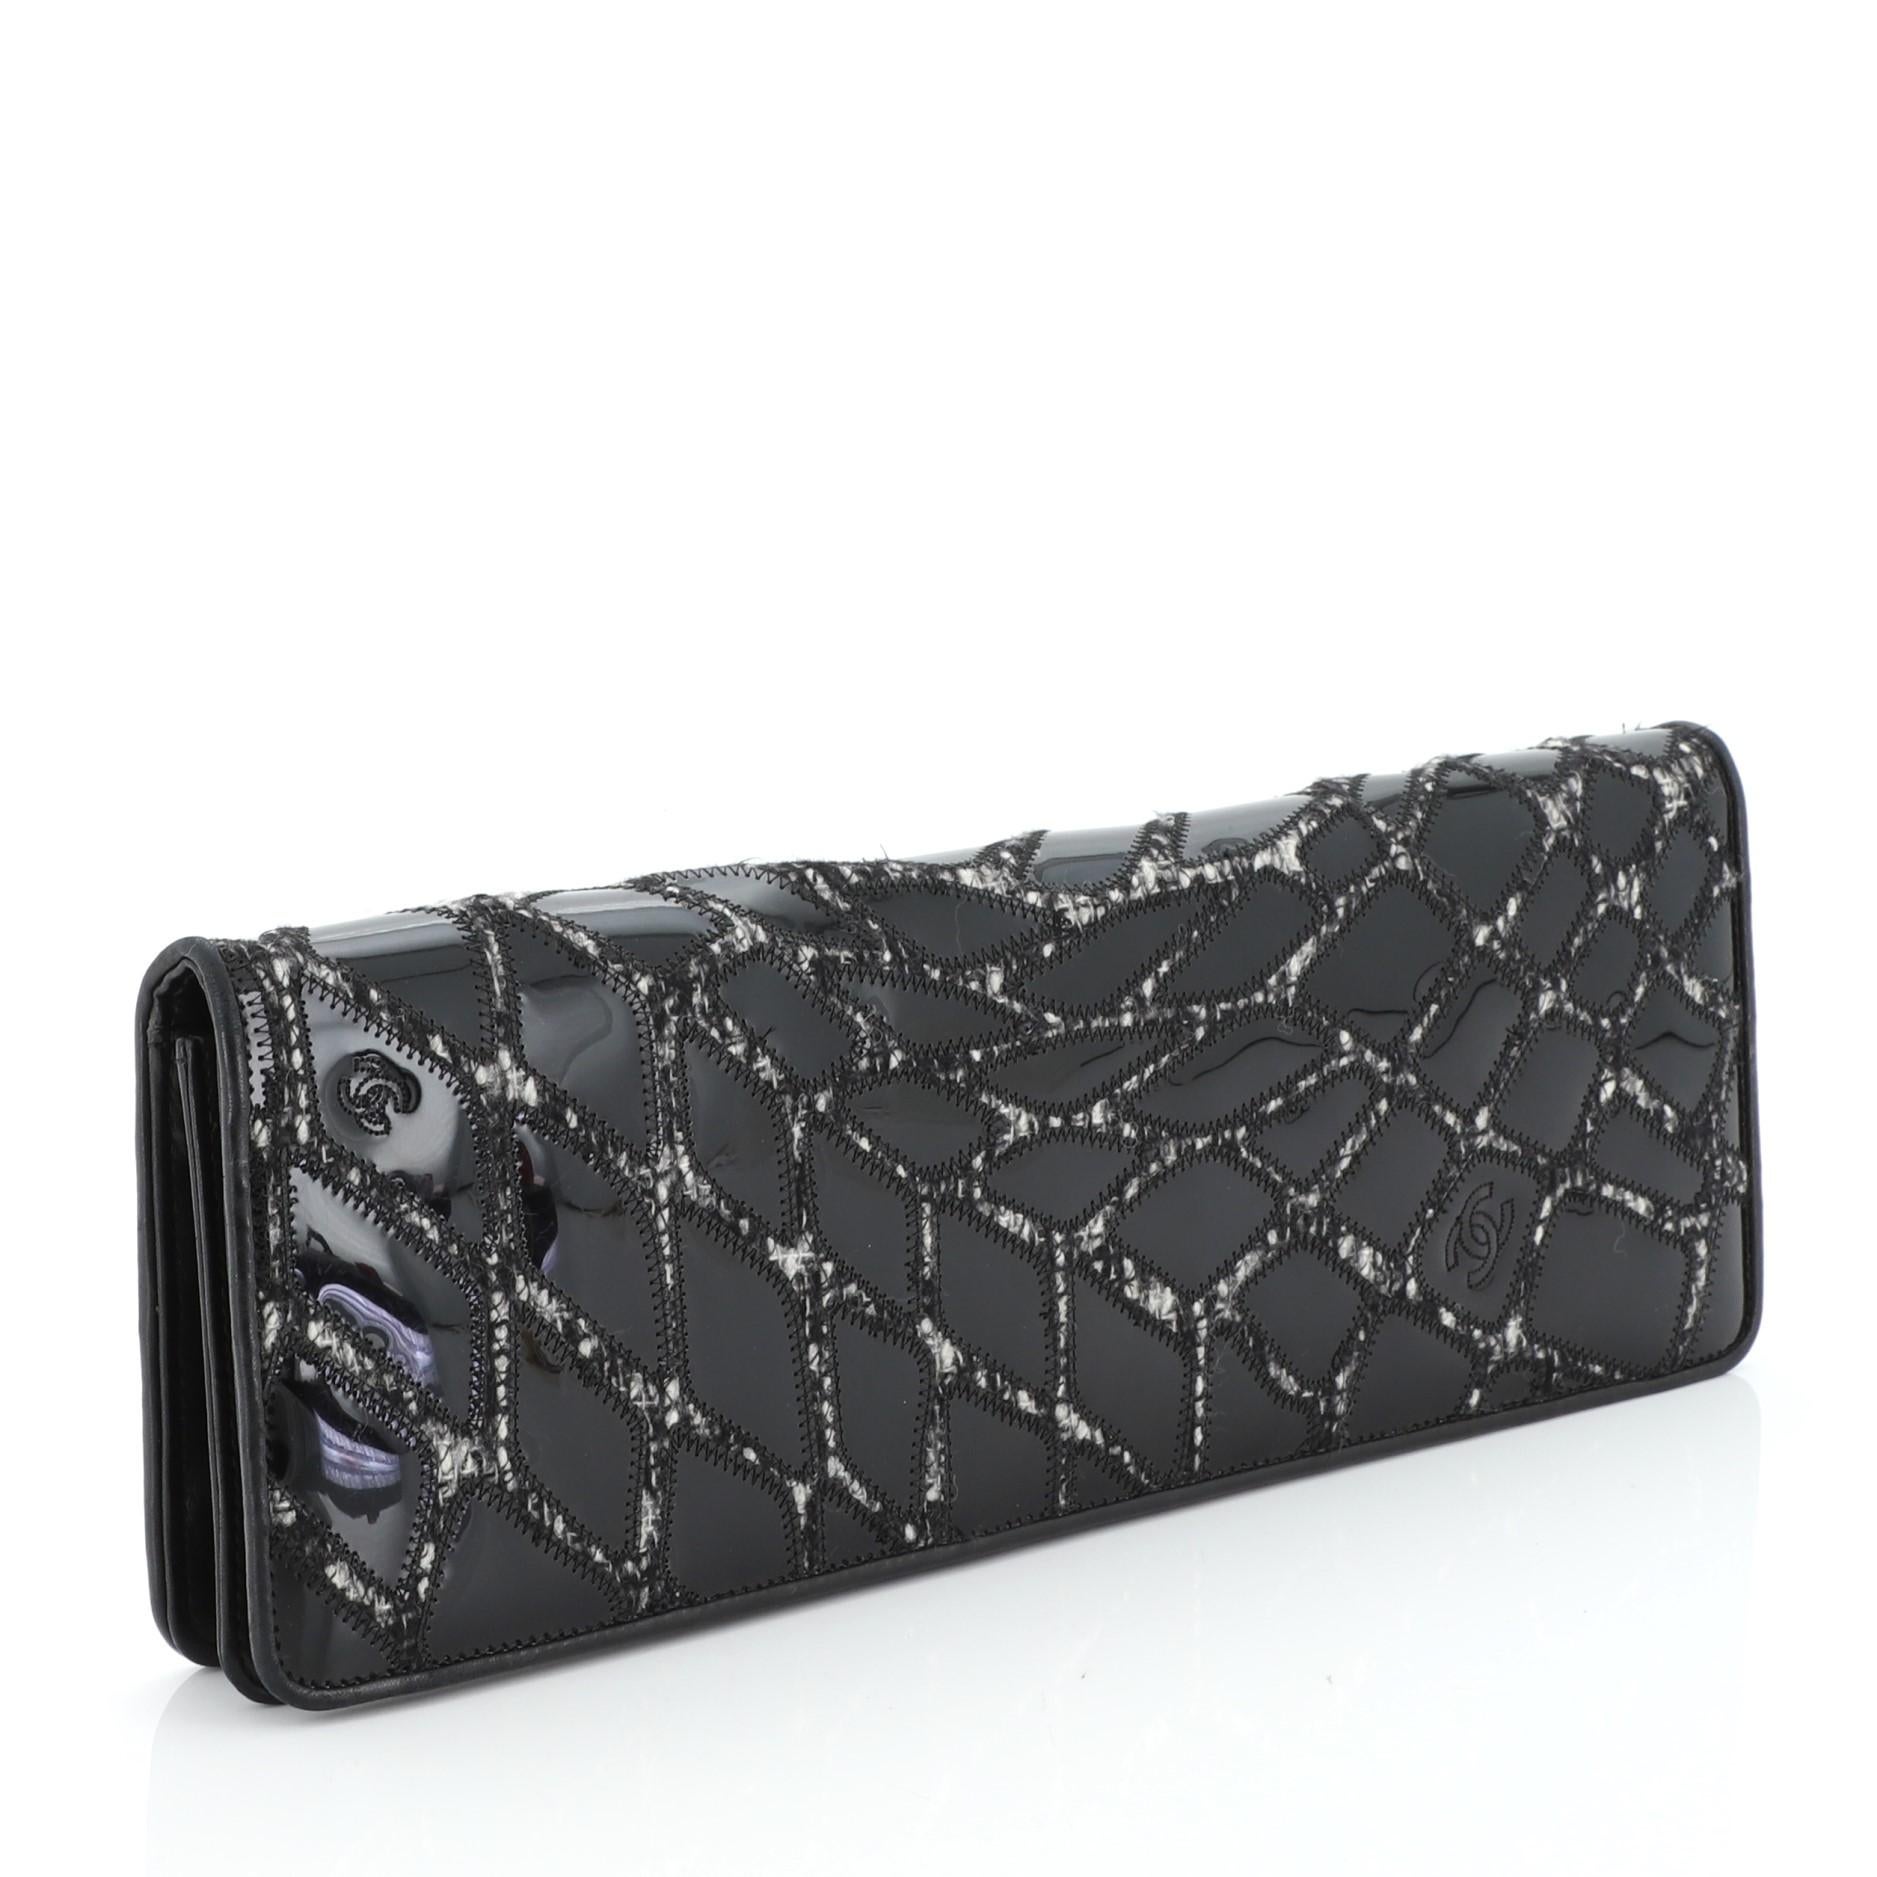 This Chanel Scales Clutch Patent and Tweed, crafted in black patent leather and tweed, features scales design and silver-tone hardware. Its snap closure opens to a black satin interior. Hologram sticker reads:12566867.

Condition: Good. Heavy scuffs